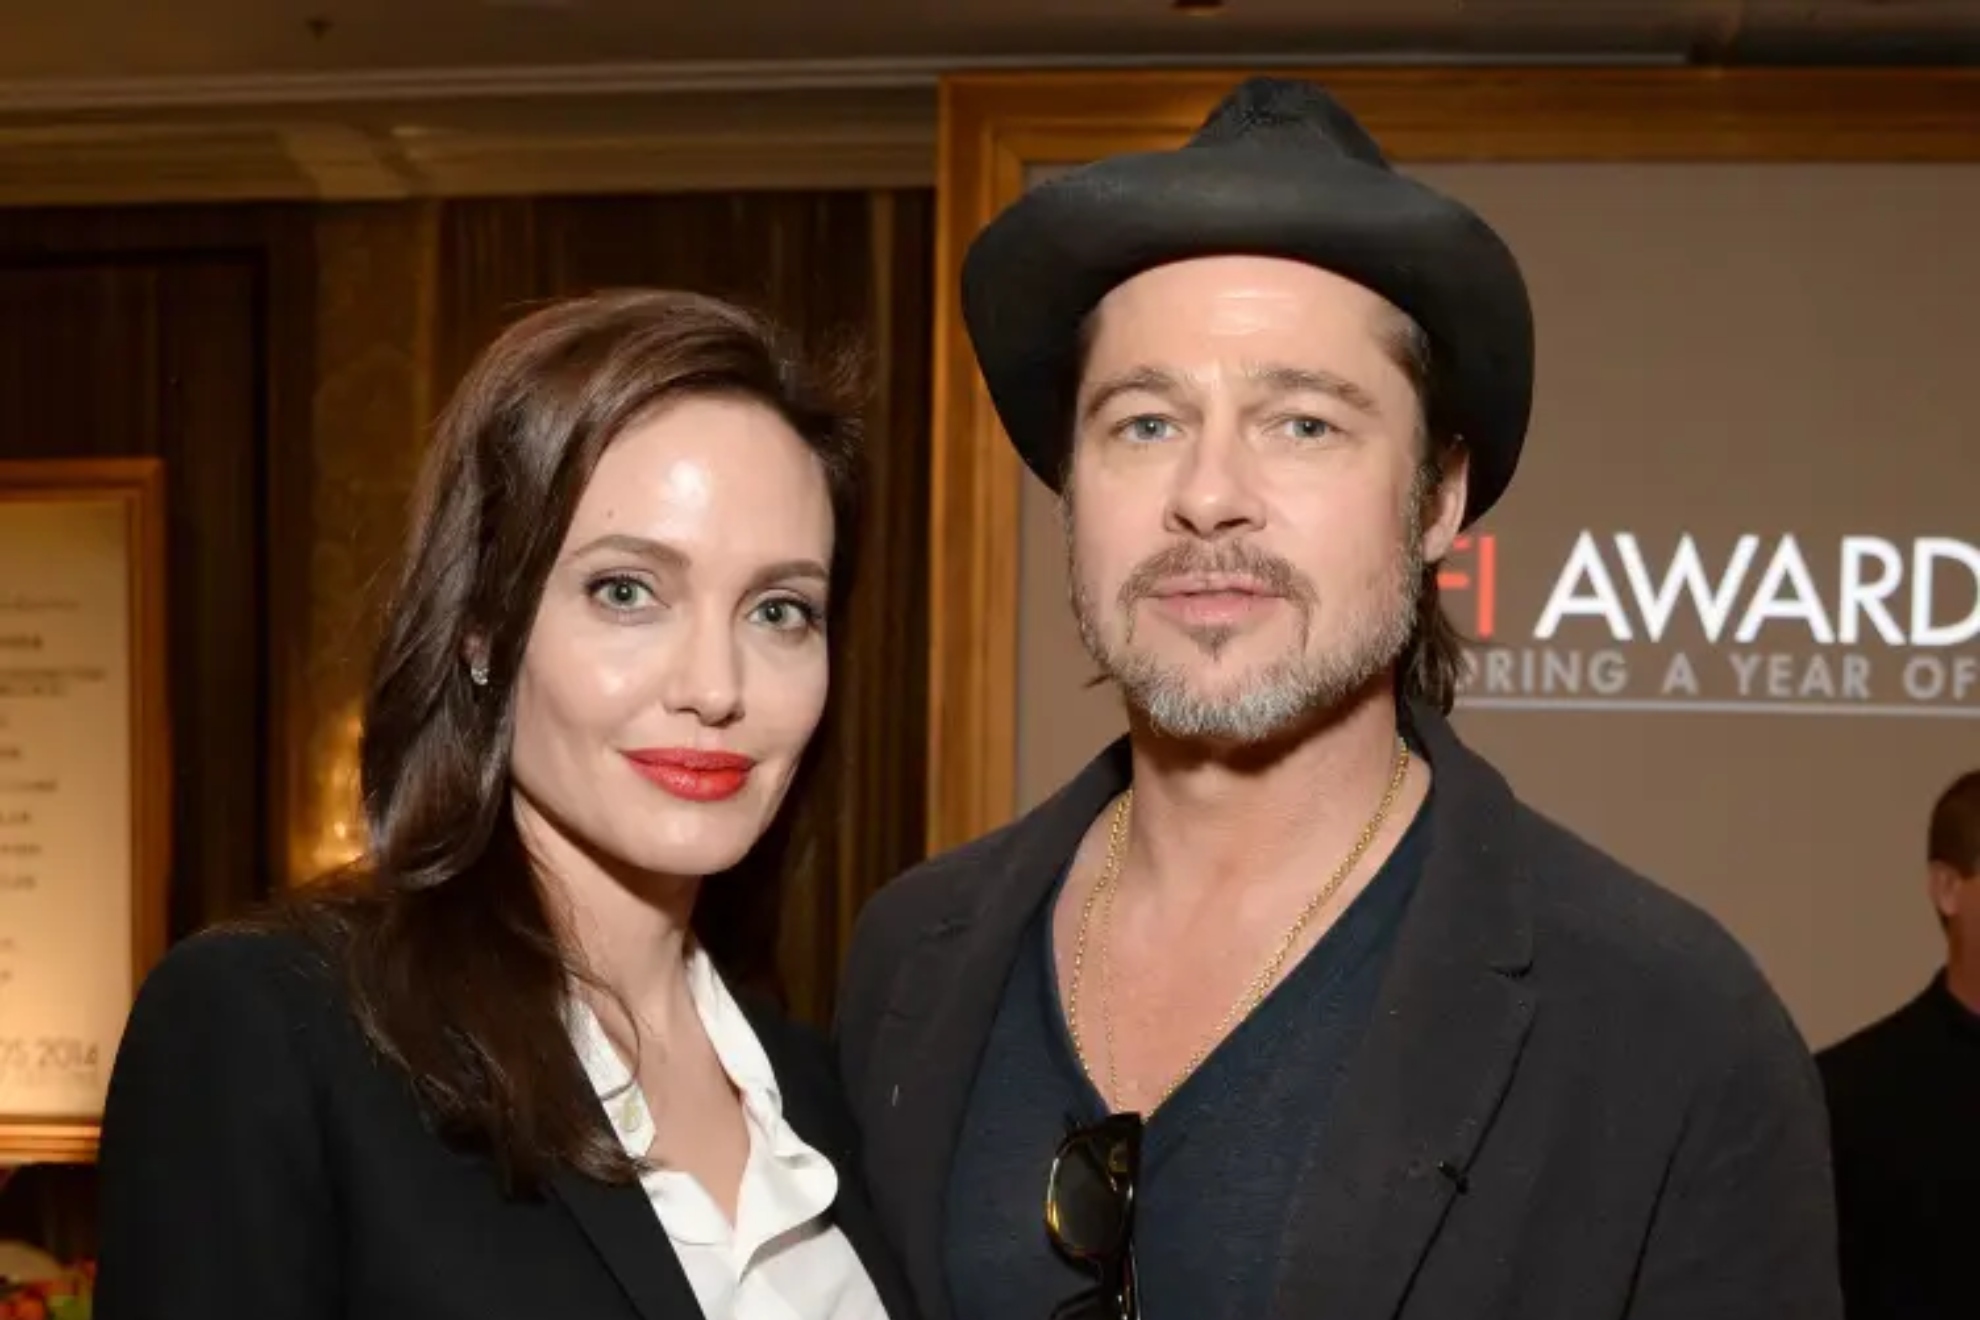 Brad Pitt allegedly choked one of his kids and hit Angelina Jolie during plane fight